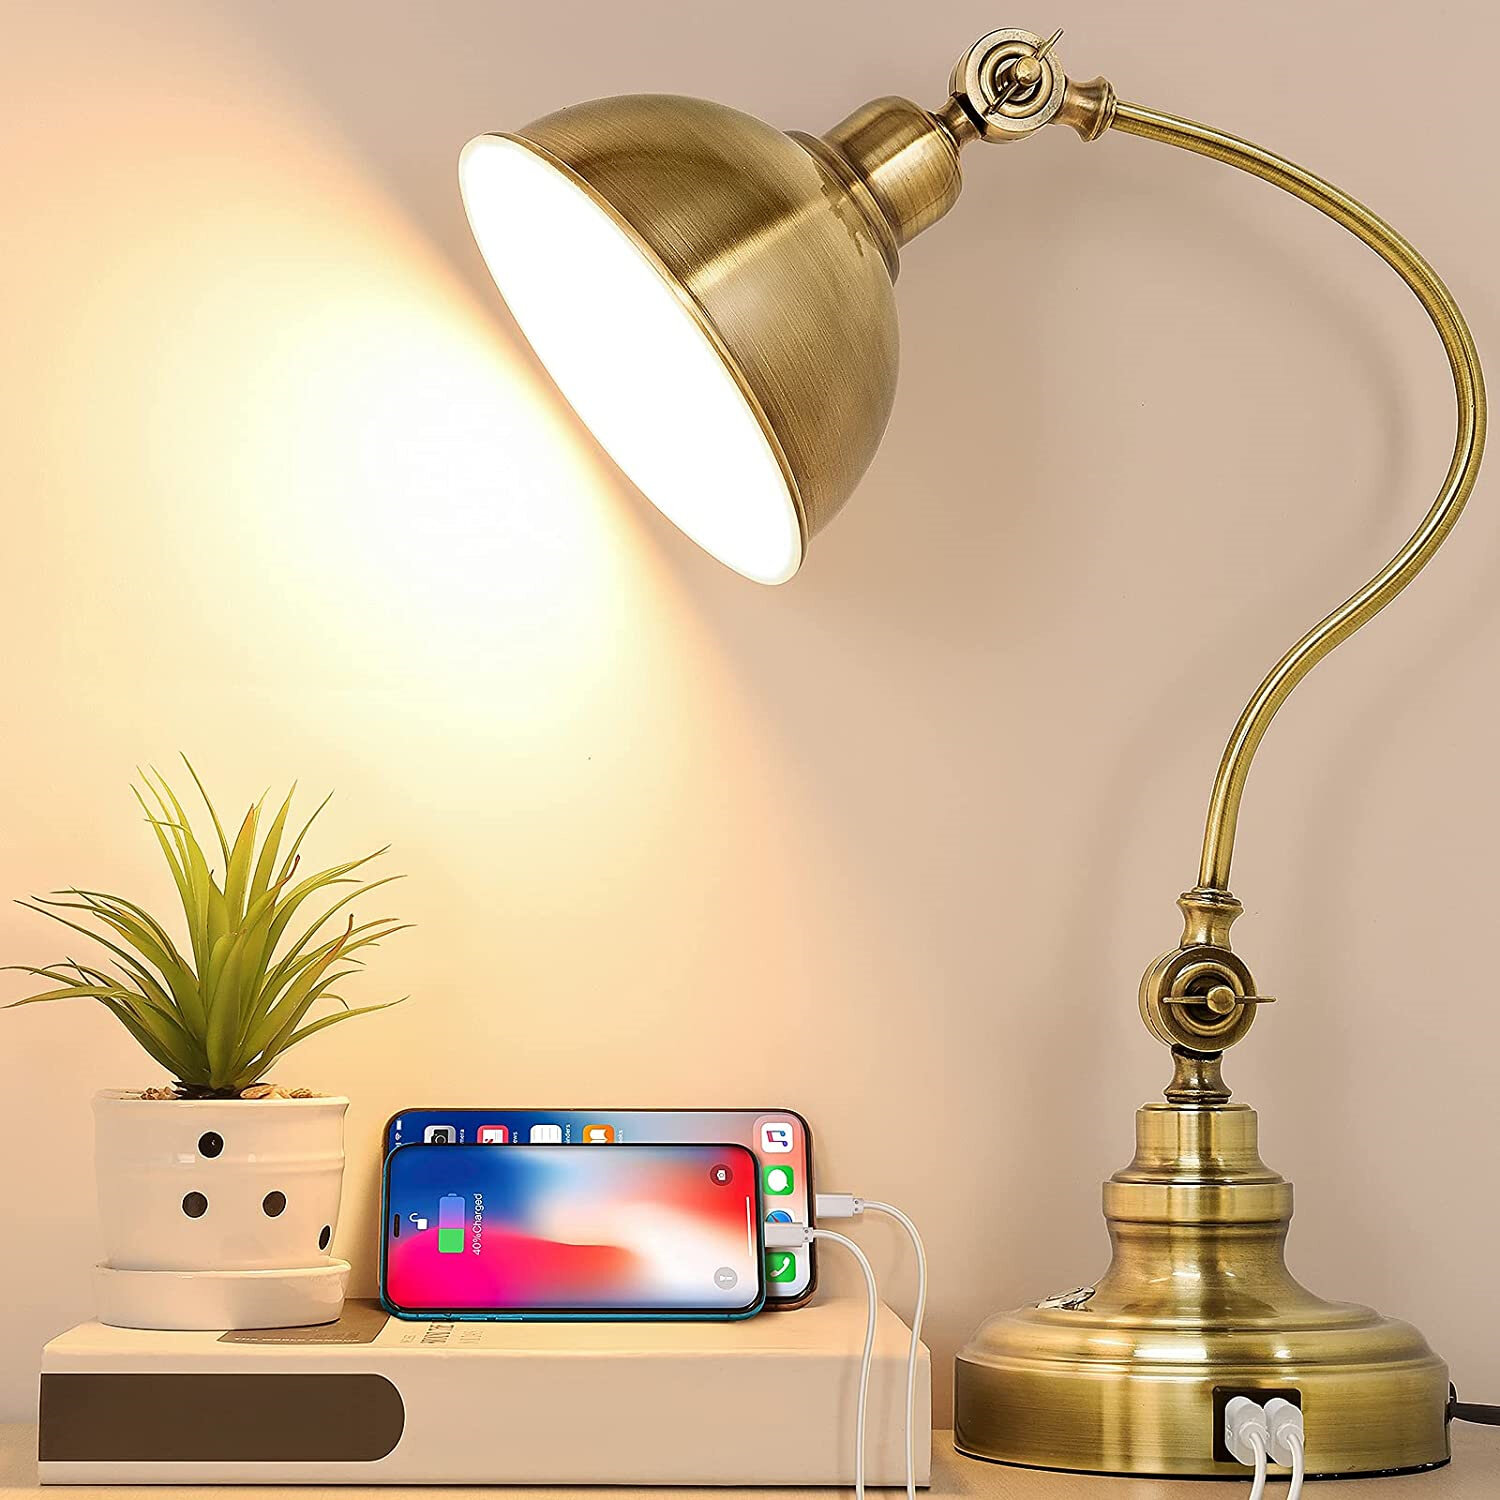 Desk Lamp,LED Eye-Caring Desk Lamp Dimmable Office Lamp with Levels x 3 Color Modes USB Charging Port Table Lamp for Bedroom,Office,Reading,Study